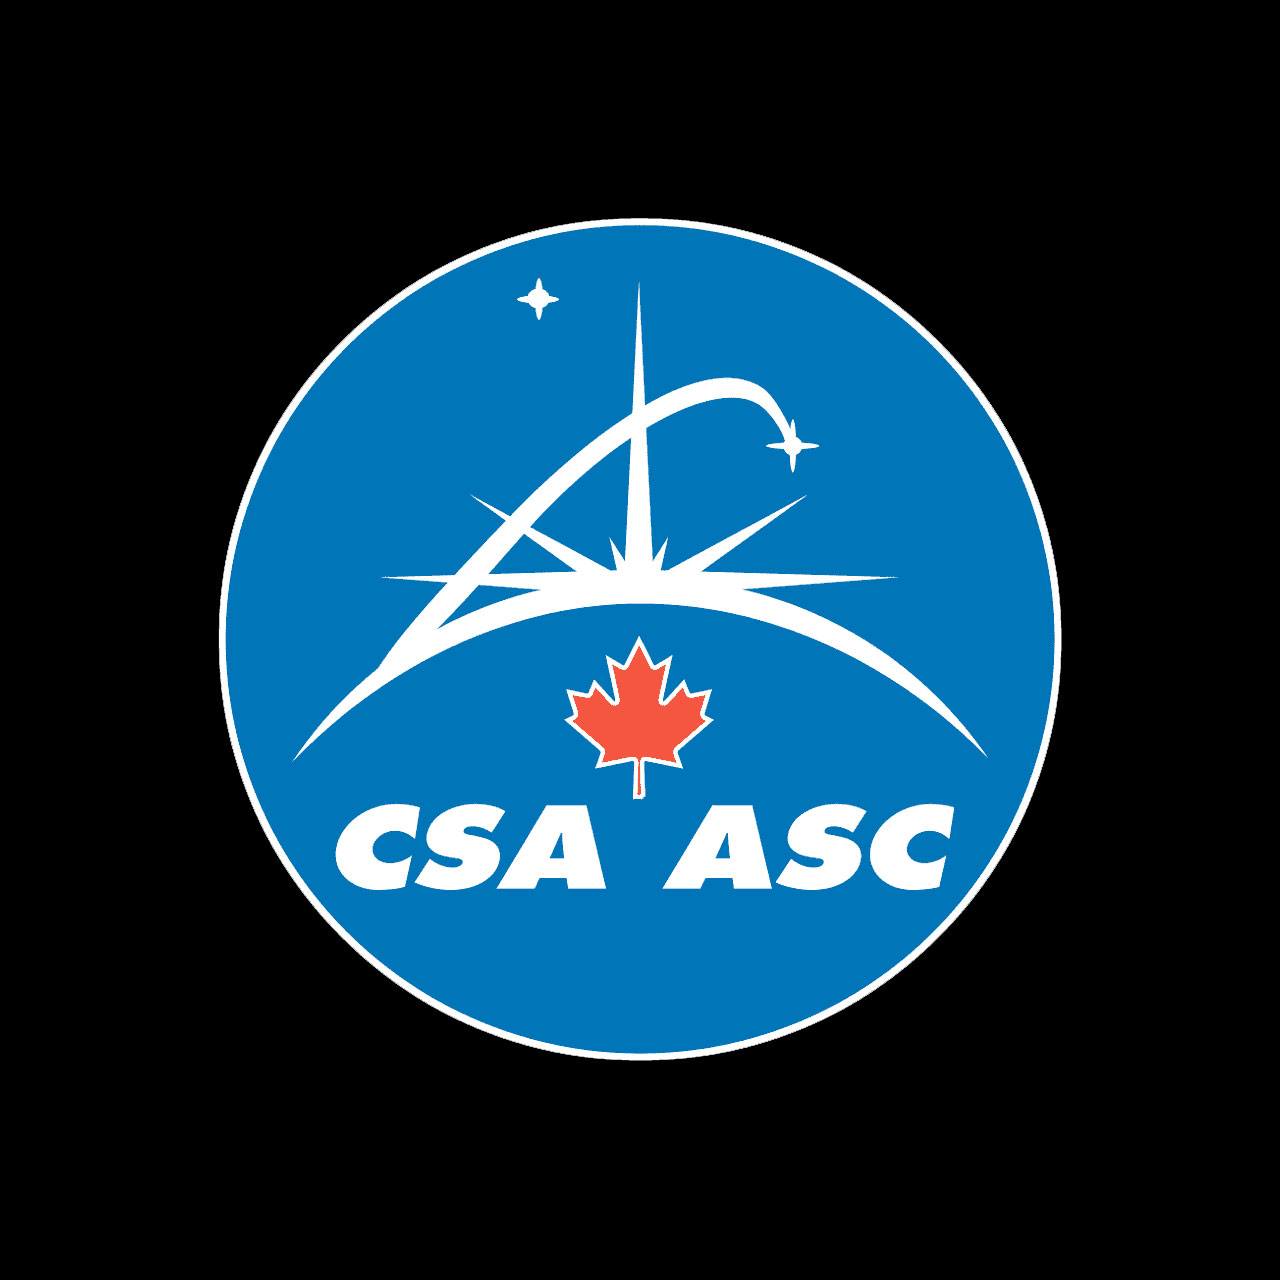 The prior Canadian Space Agency logo dates back to 1996.